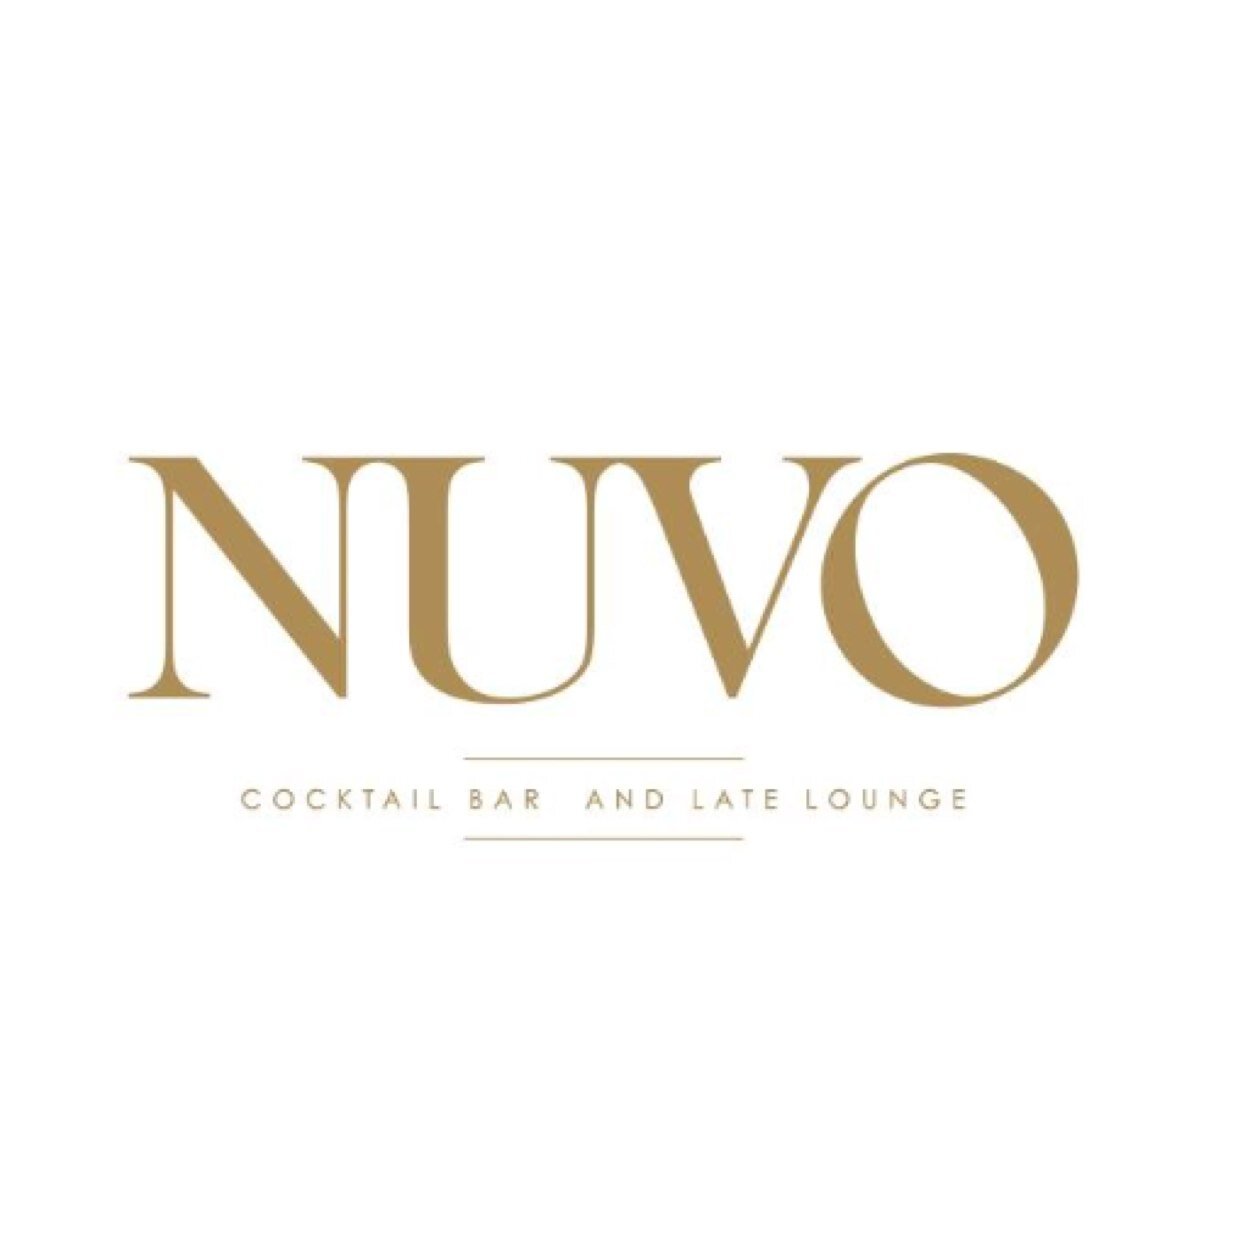 Nuvo Late Lounge. Award winning club. Table service & Guestlist only. @okobirmingham our Japanese restaurant on the ground floor of Nuvo.